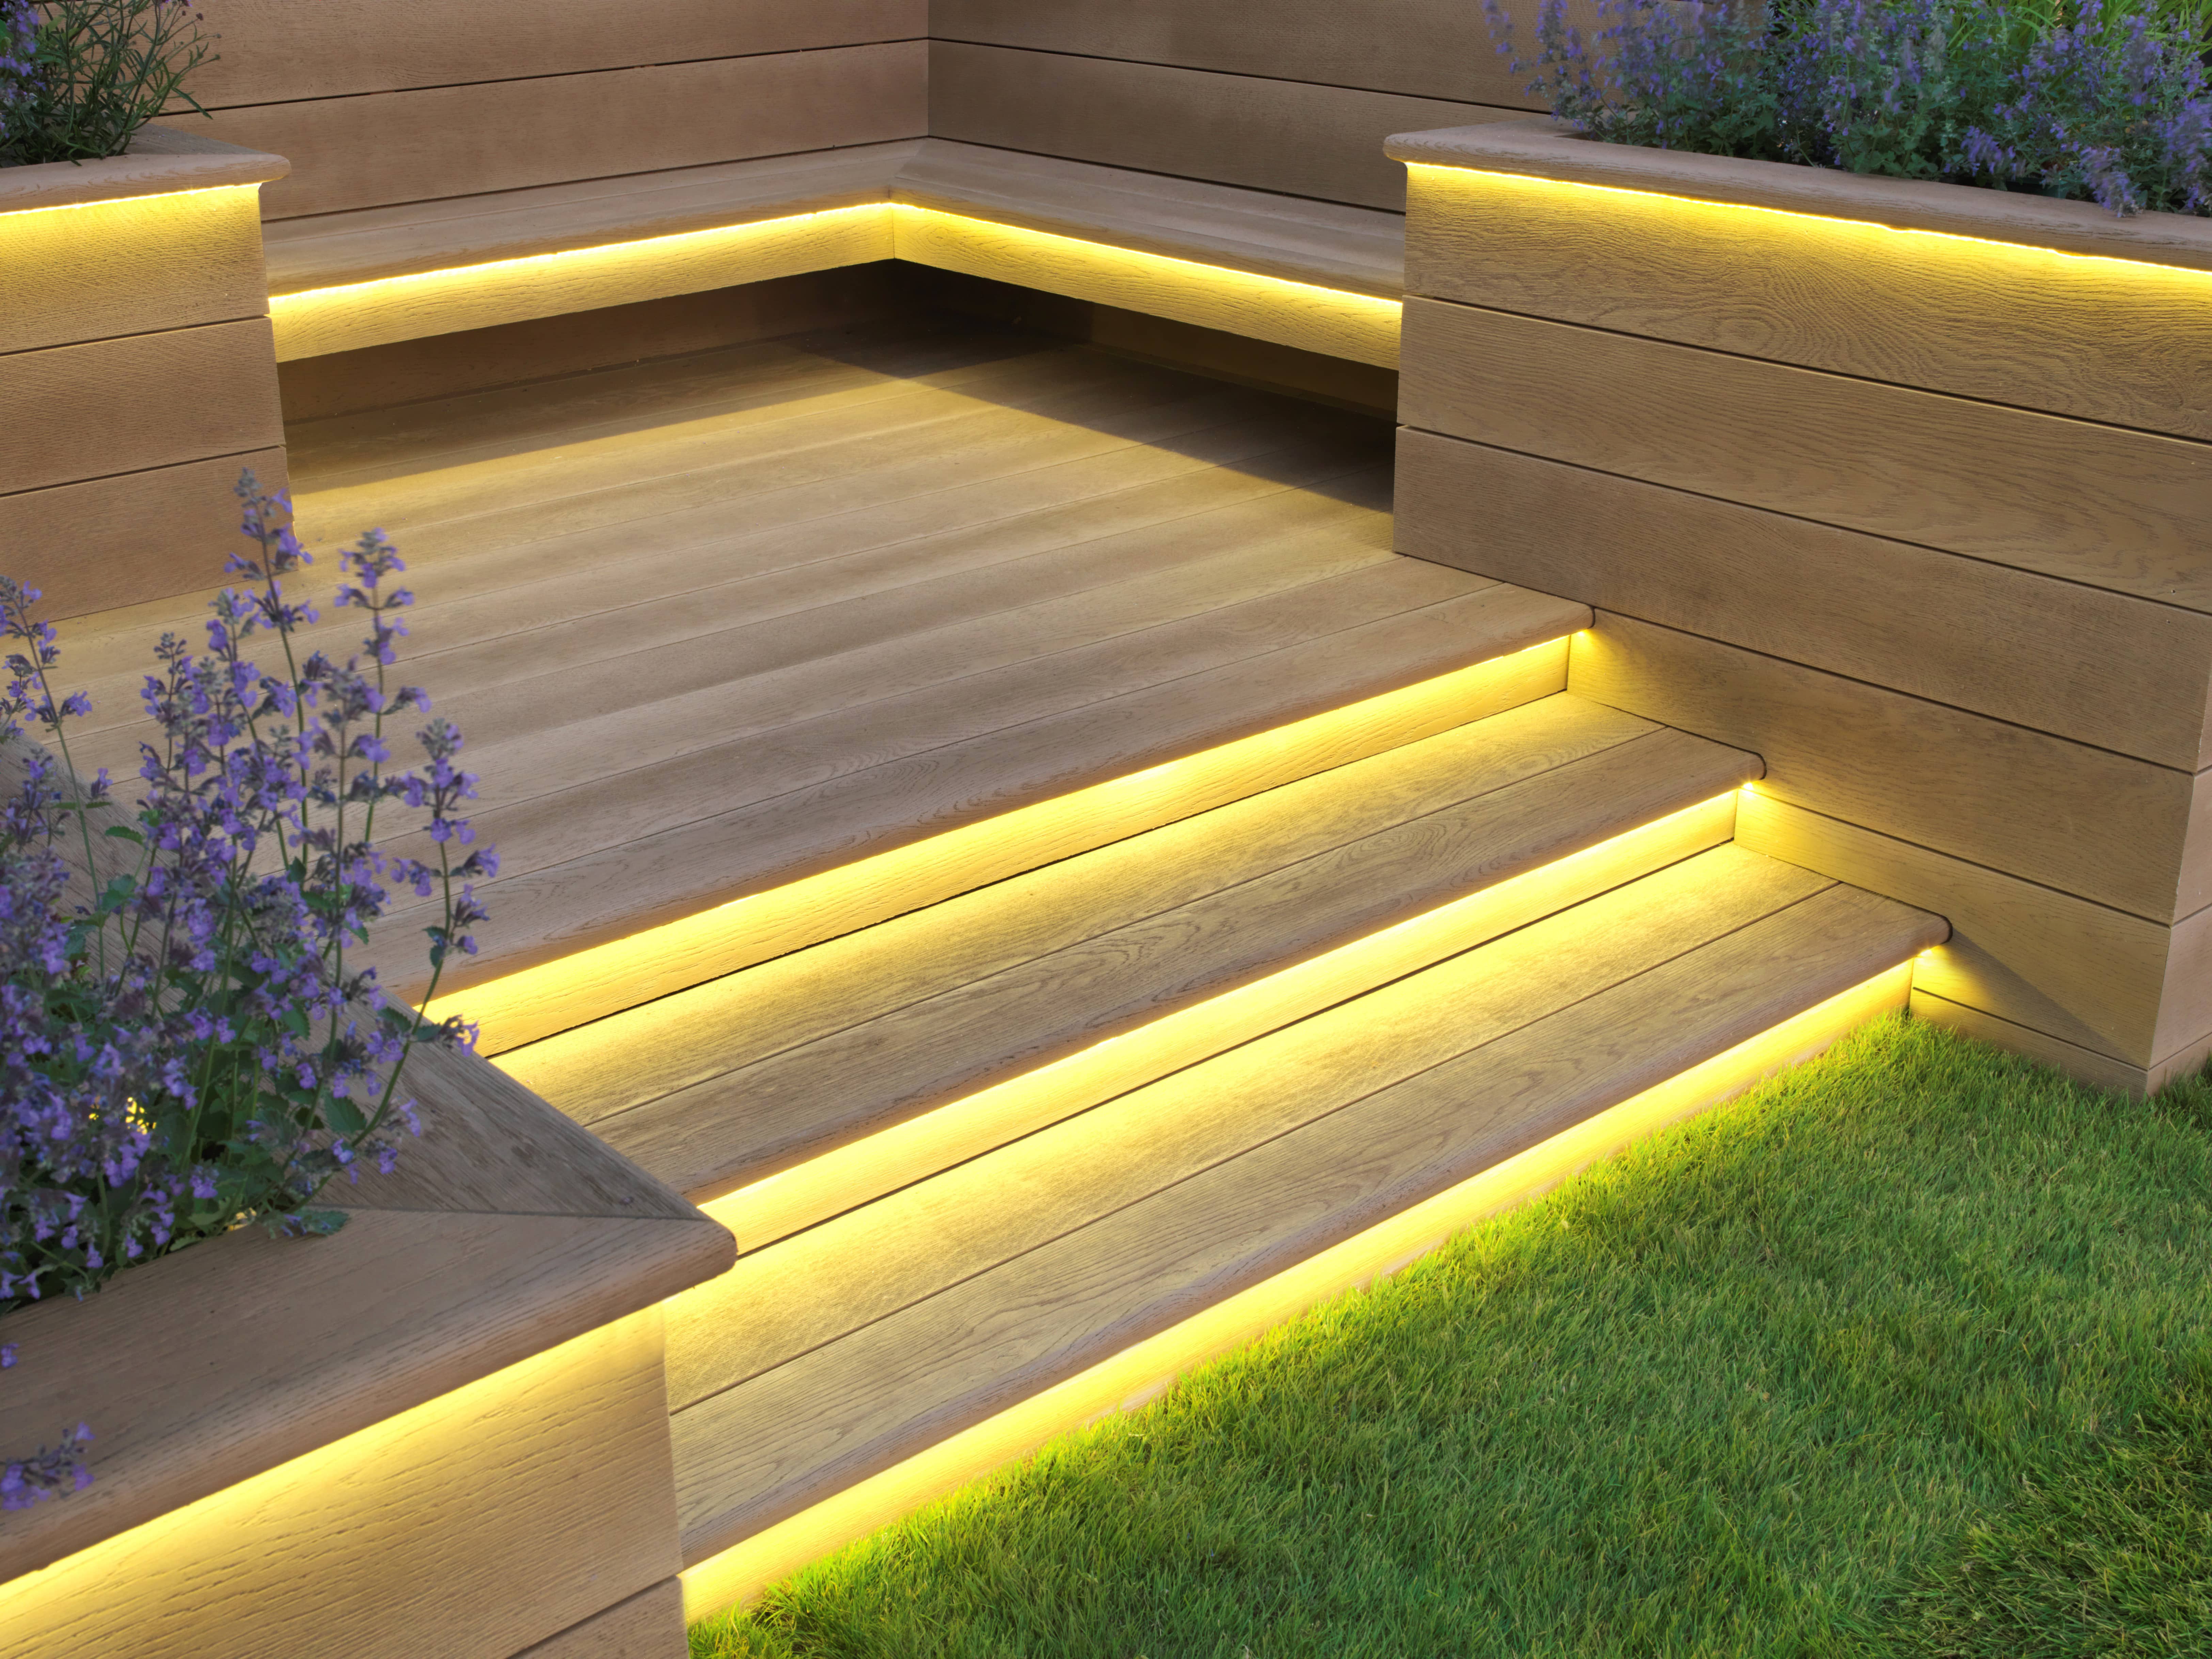 Engineered timber decking solution